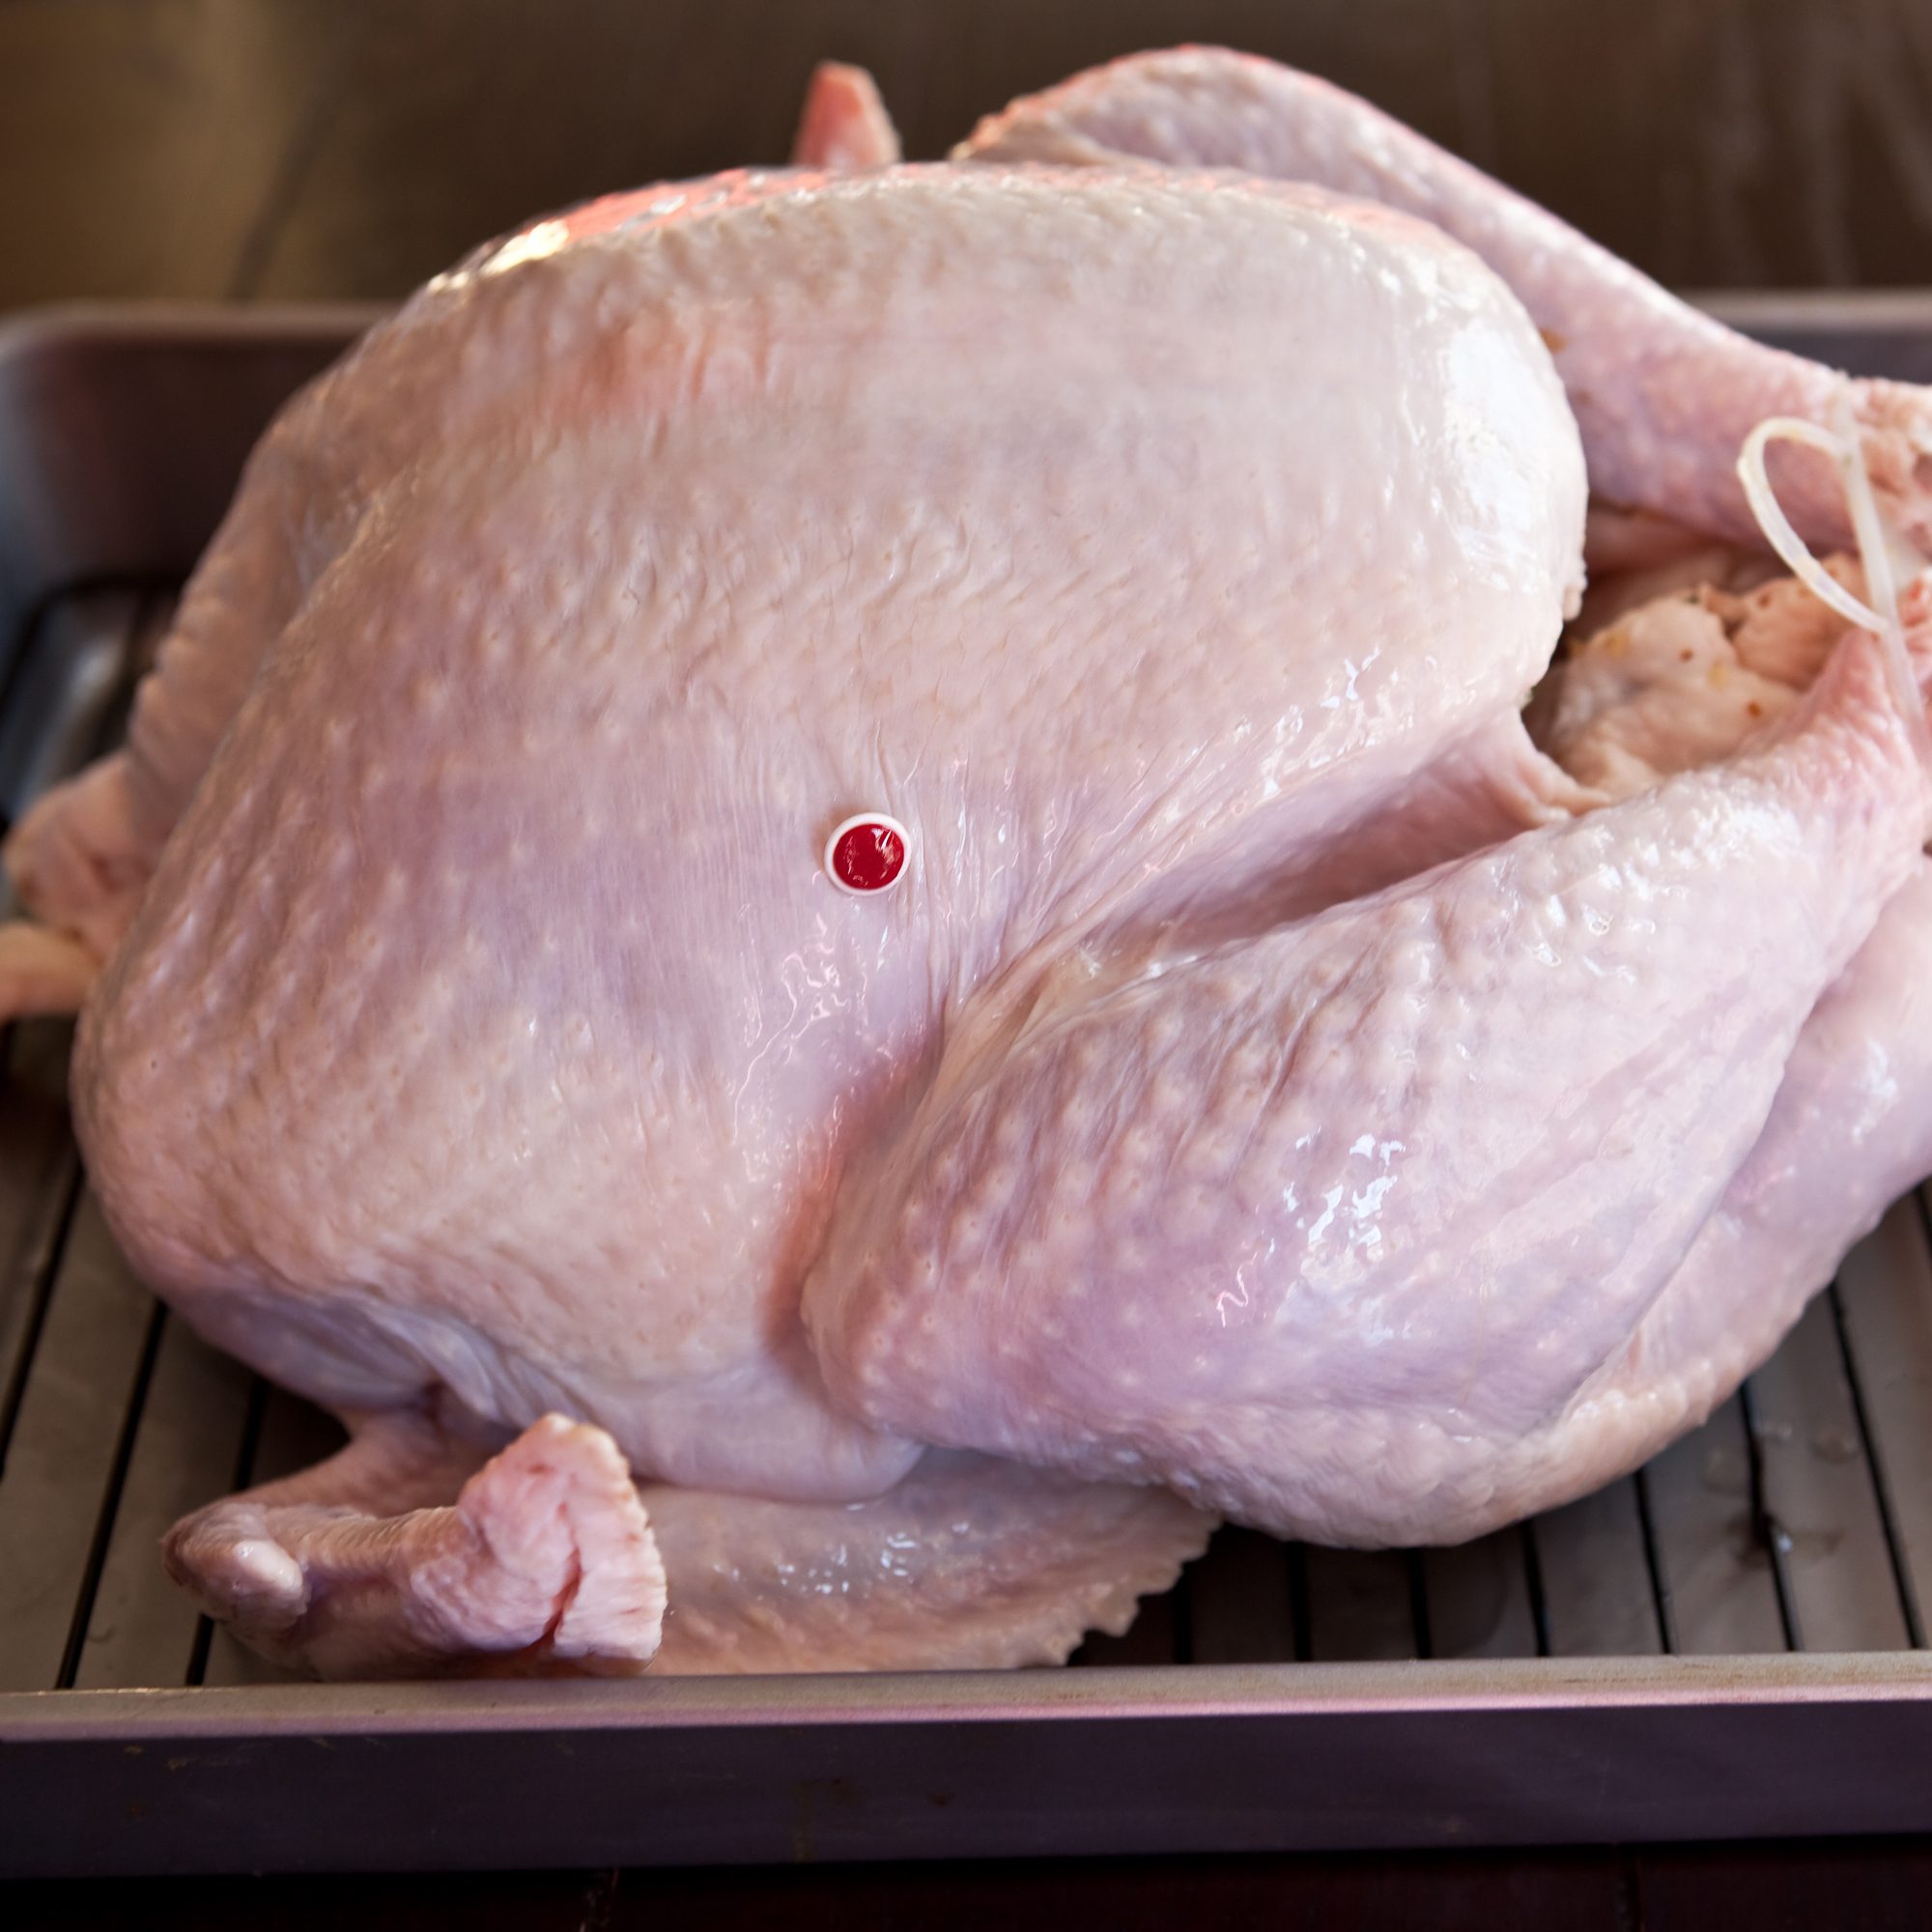 An uncooked turkey in a baking pan.